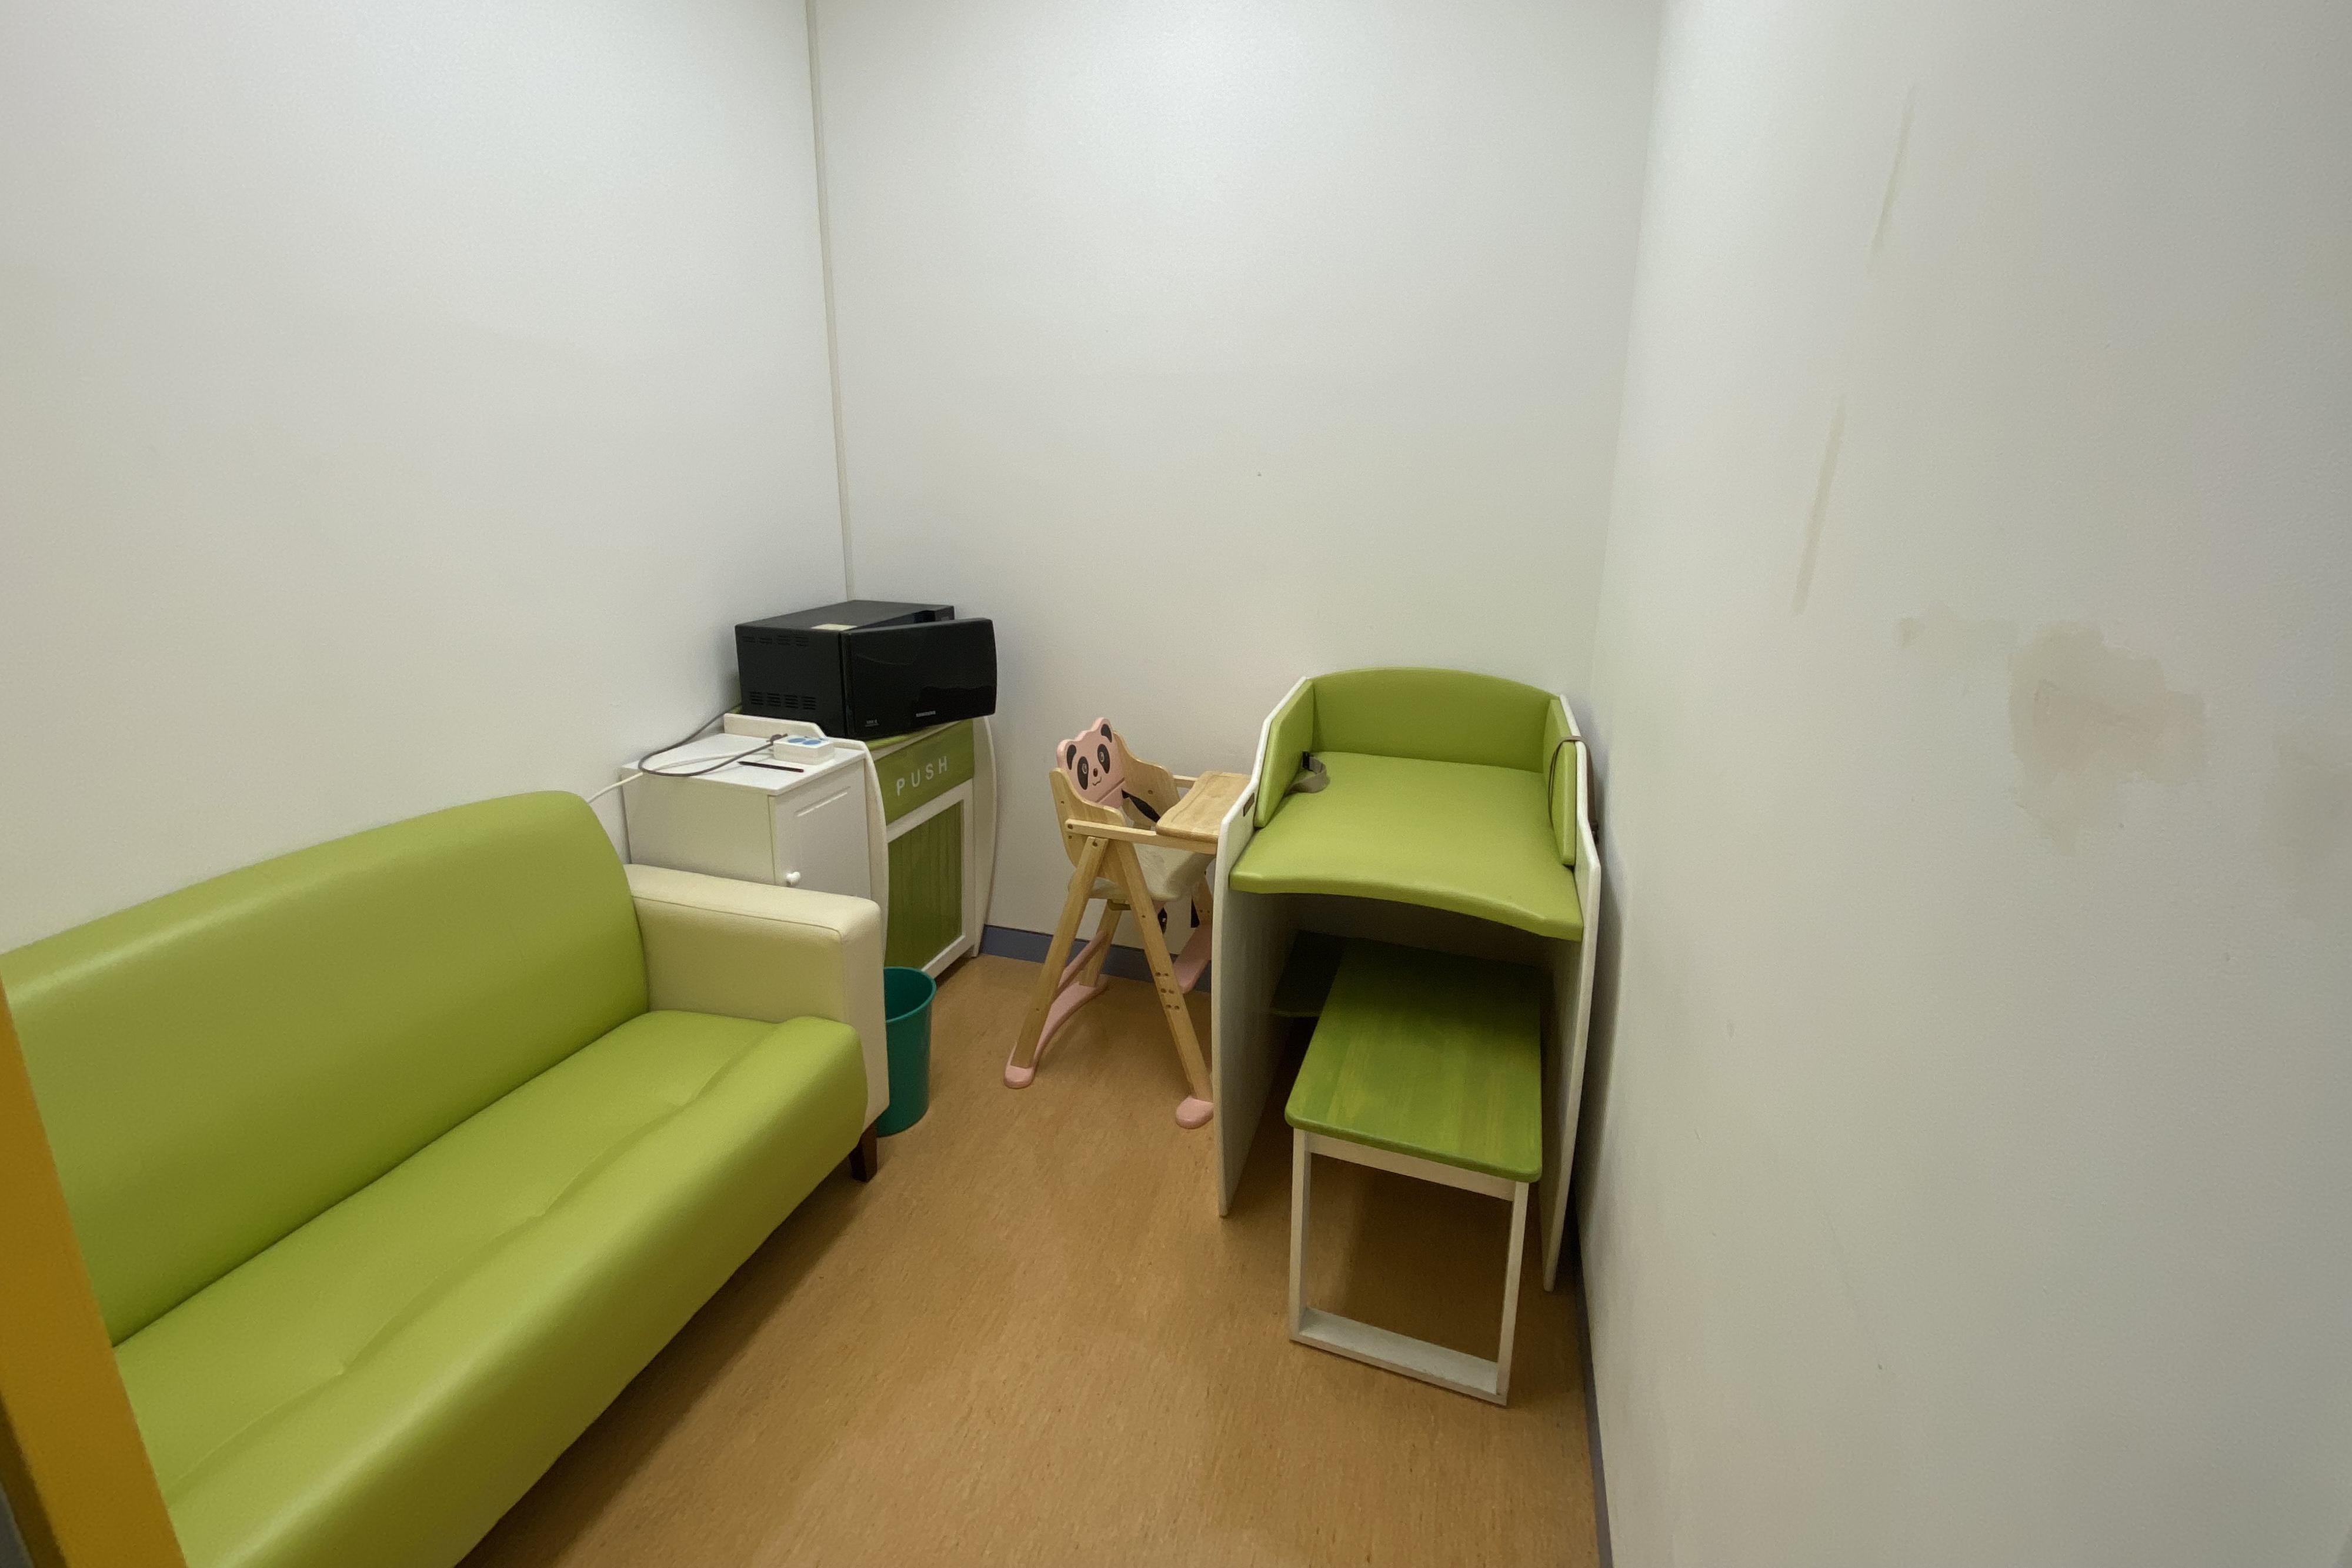 Lounge for families with children 0 : Interior view of the nursing room at Seoul Sewerage Science Museum